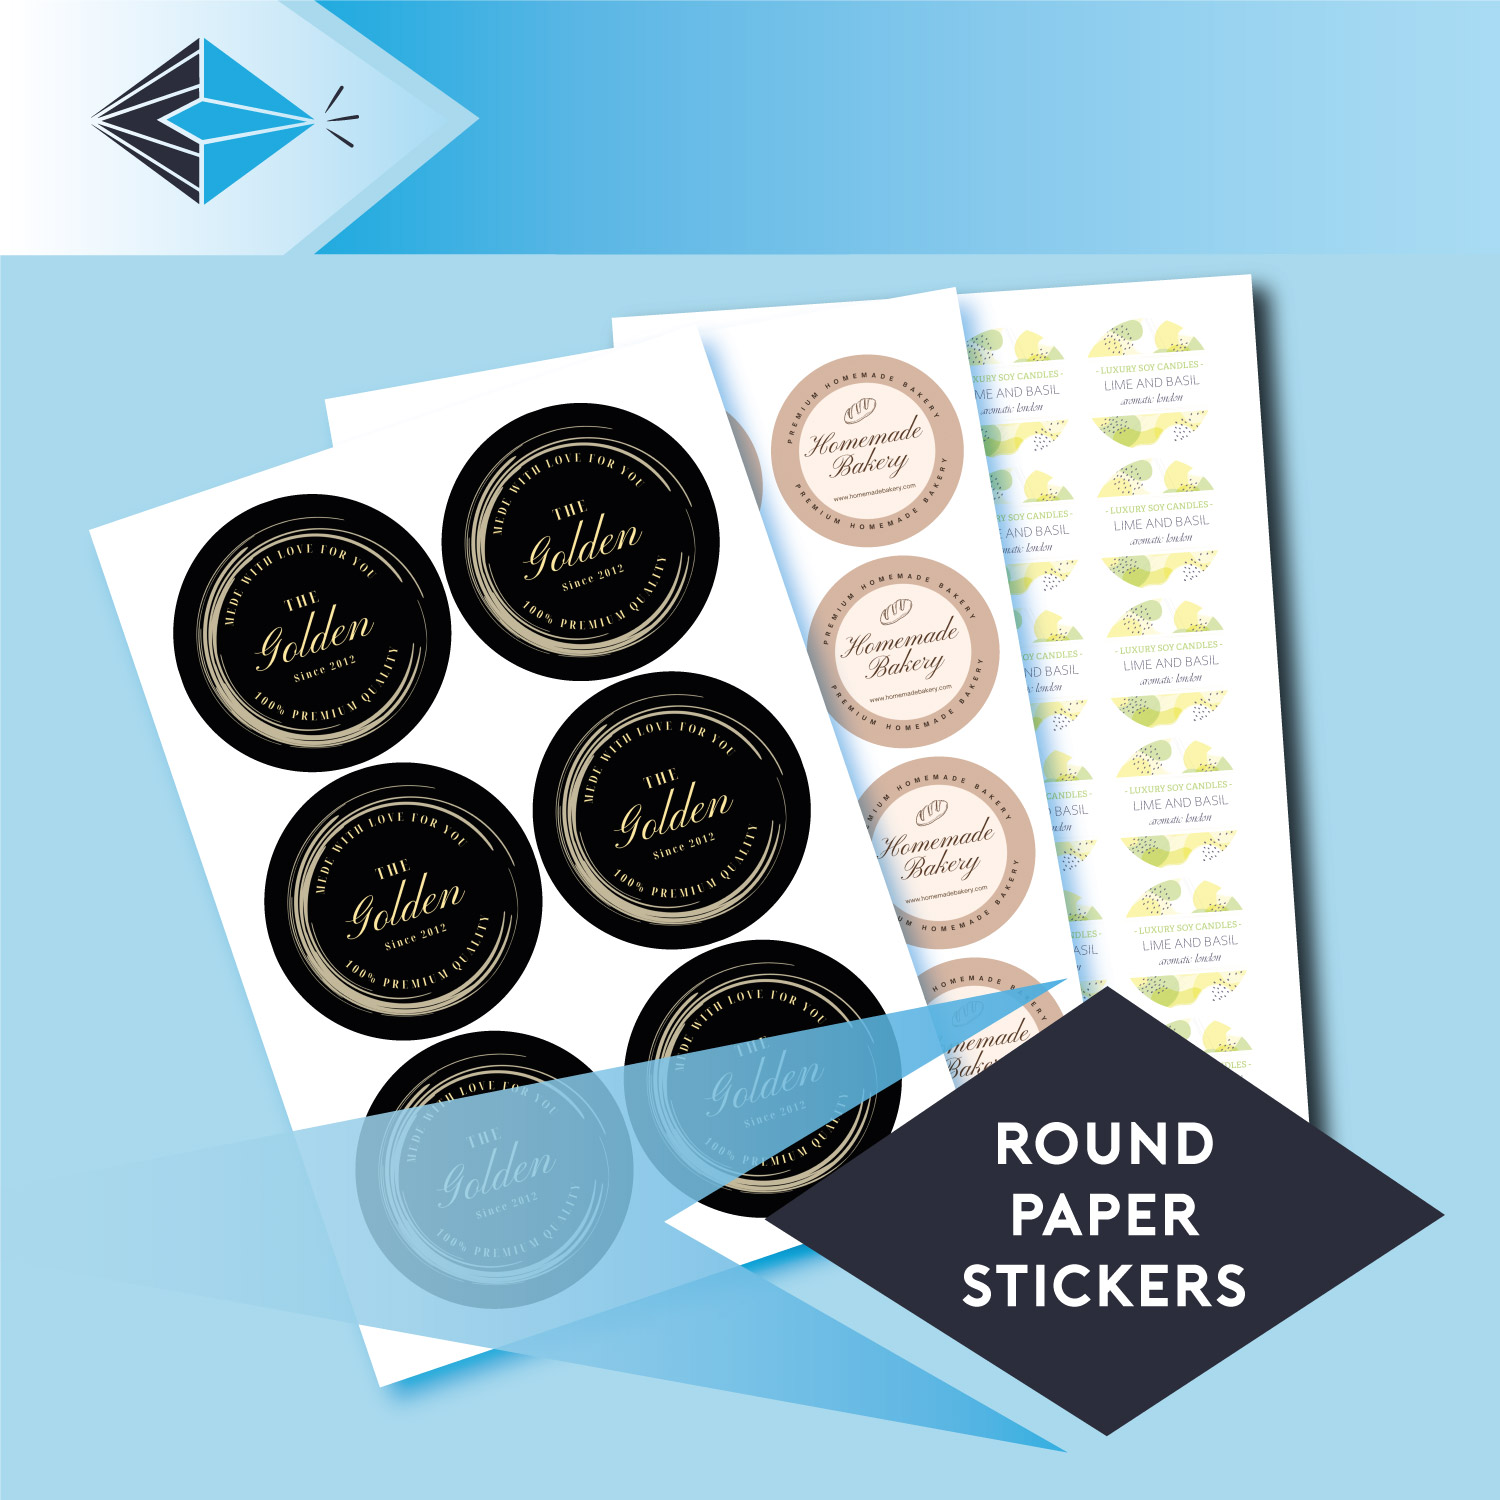 Round Paper Sticker Printing Services- Paper Stickers Cheap Stickers Stockport Manchester UK